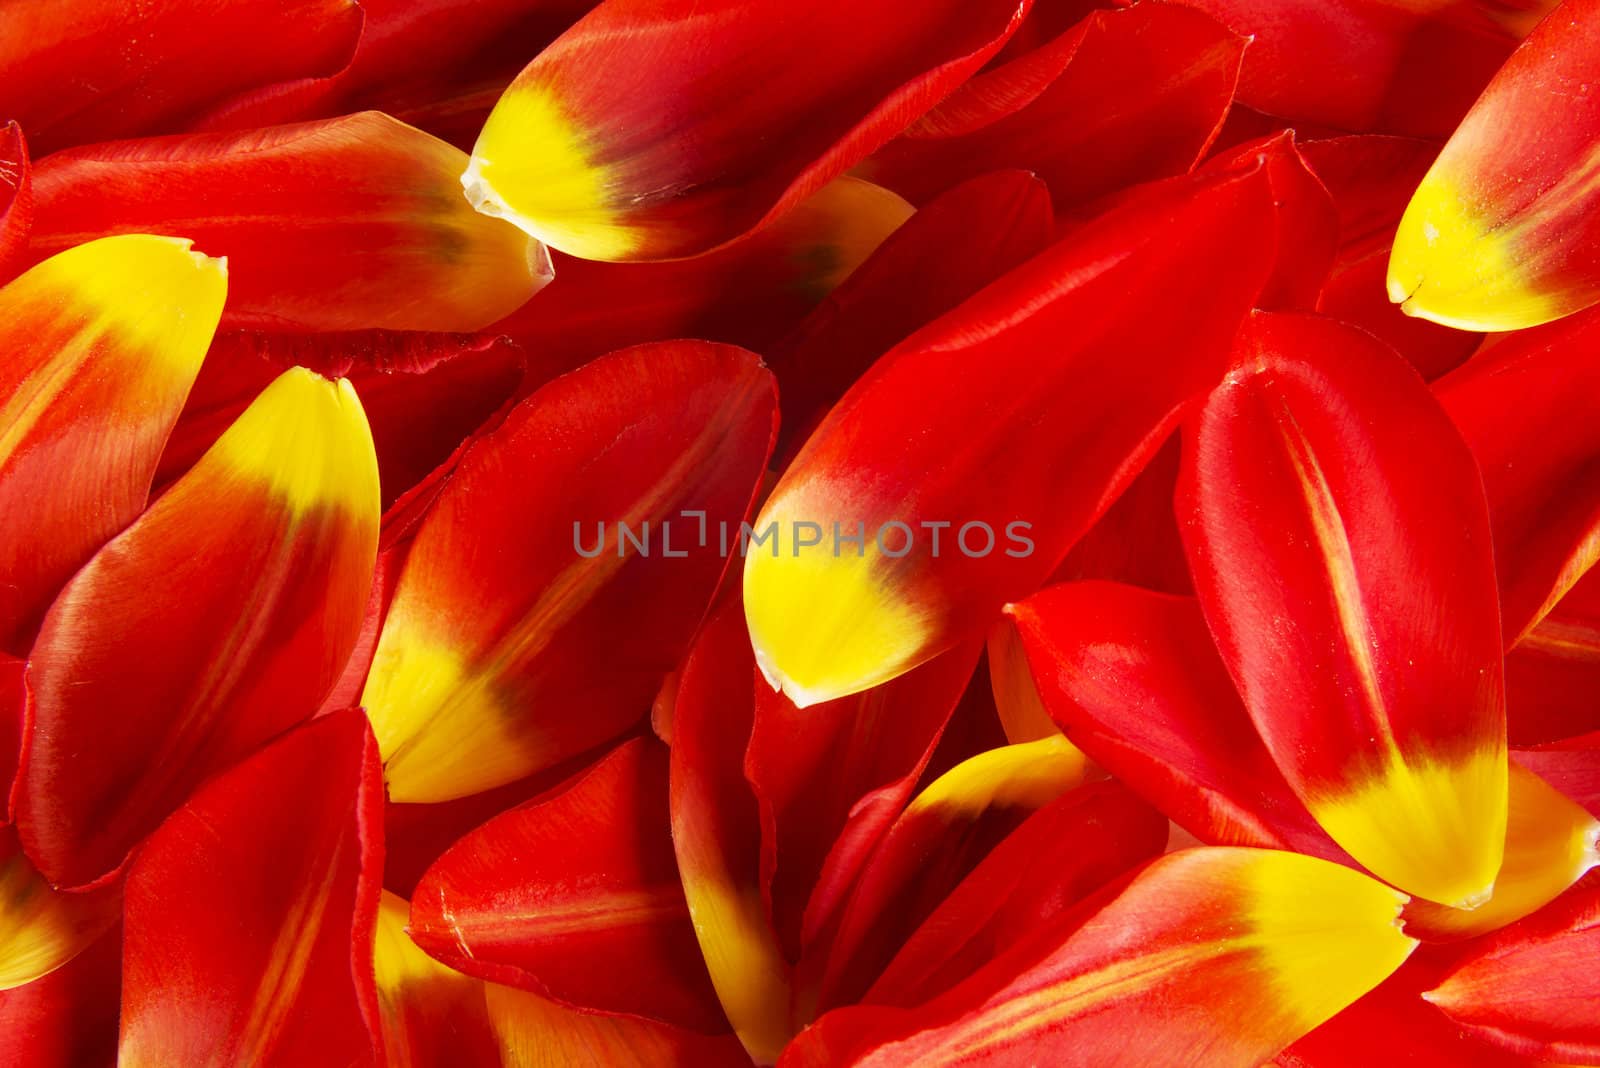 Red and yellow petals by BDS